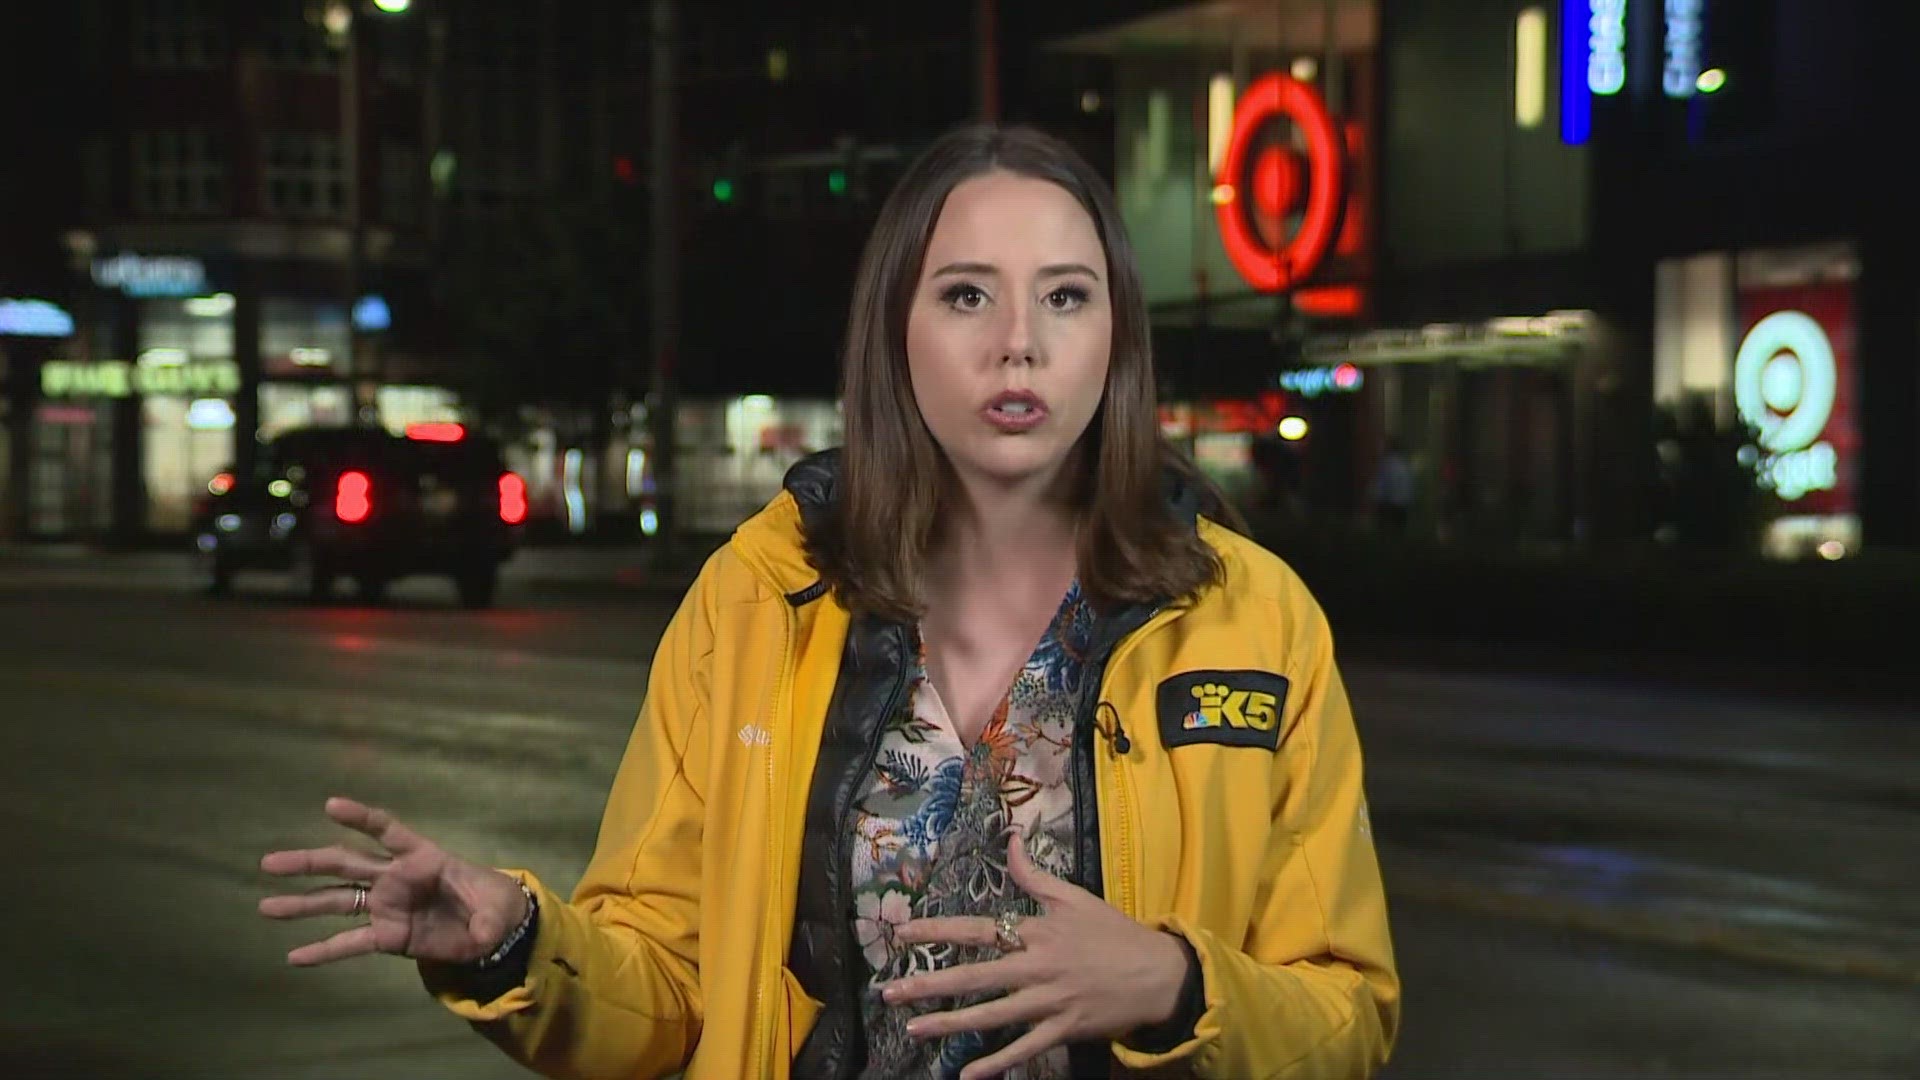 KING 5's Maddie White recounts how she and her photojournalist noticed a man was overdosing and administered Narcan inside a nearby Walgreens